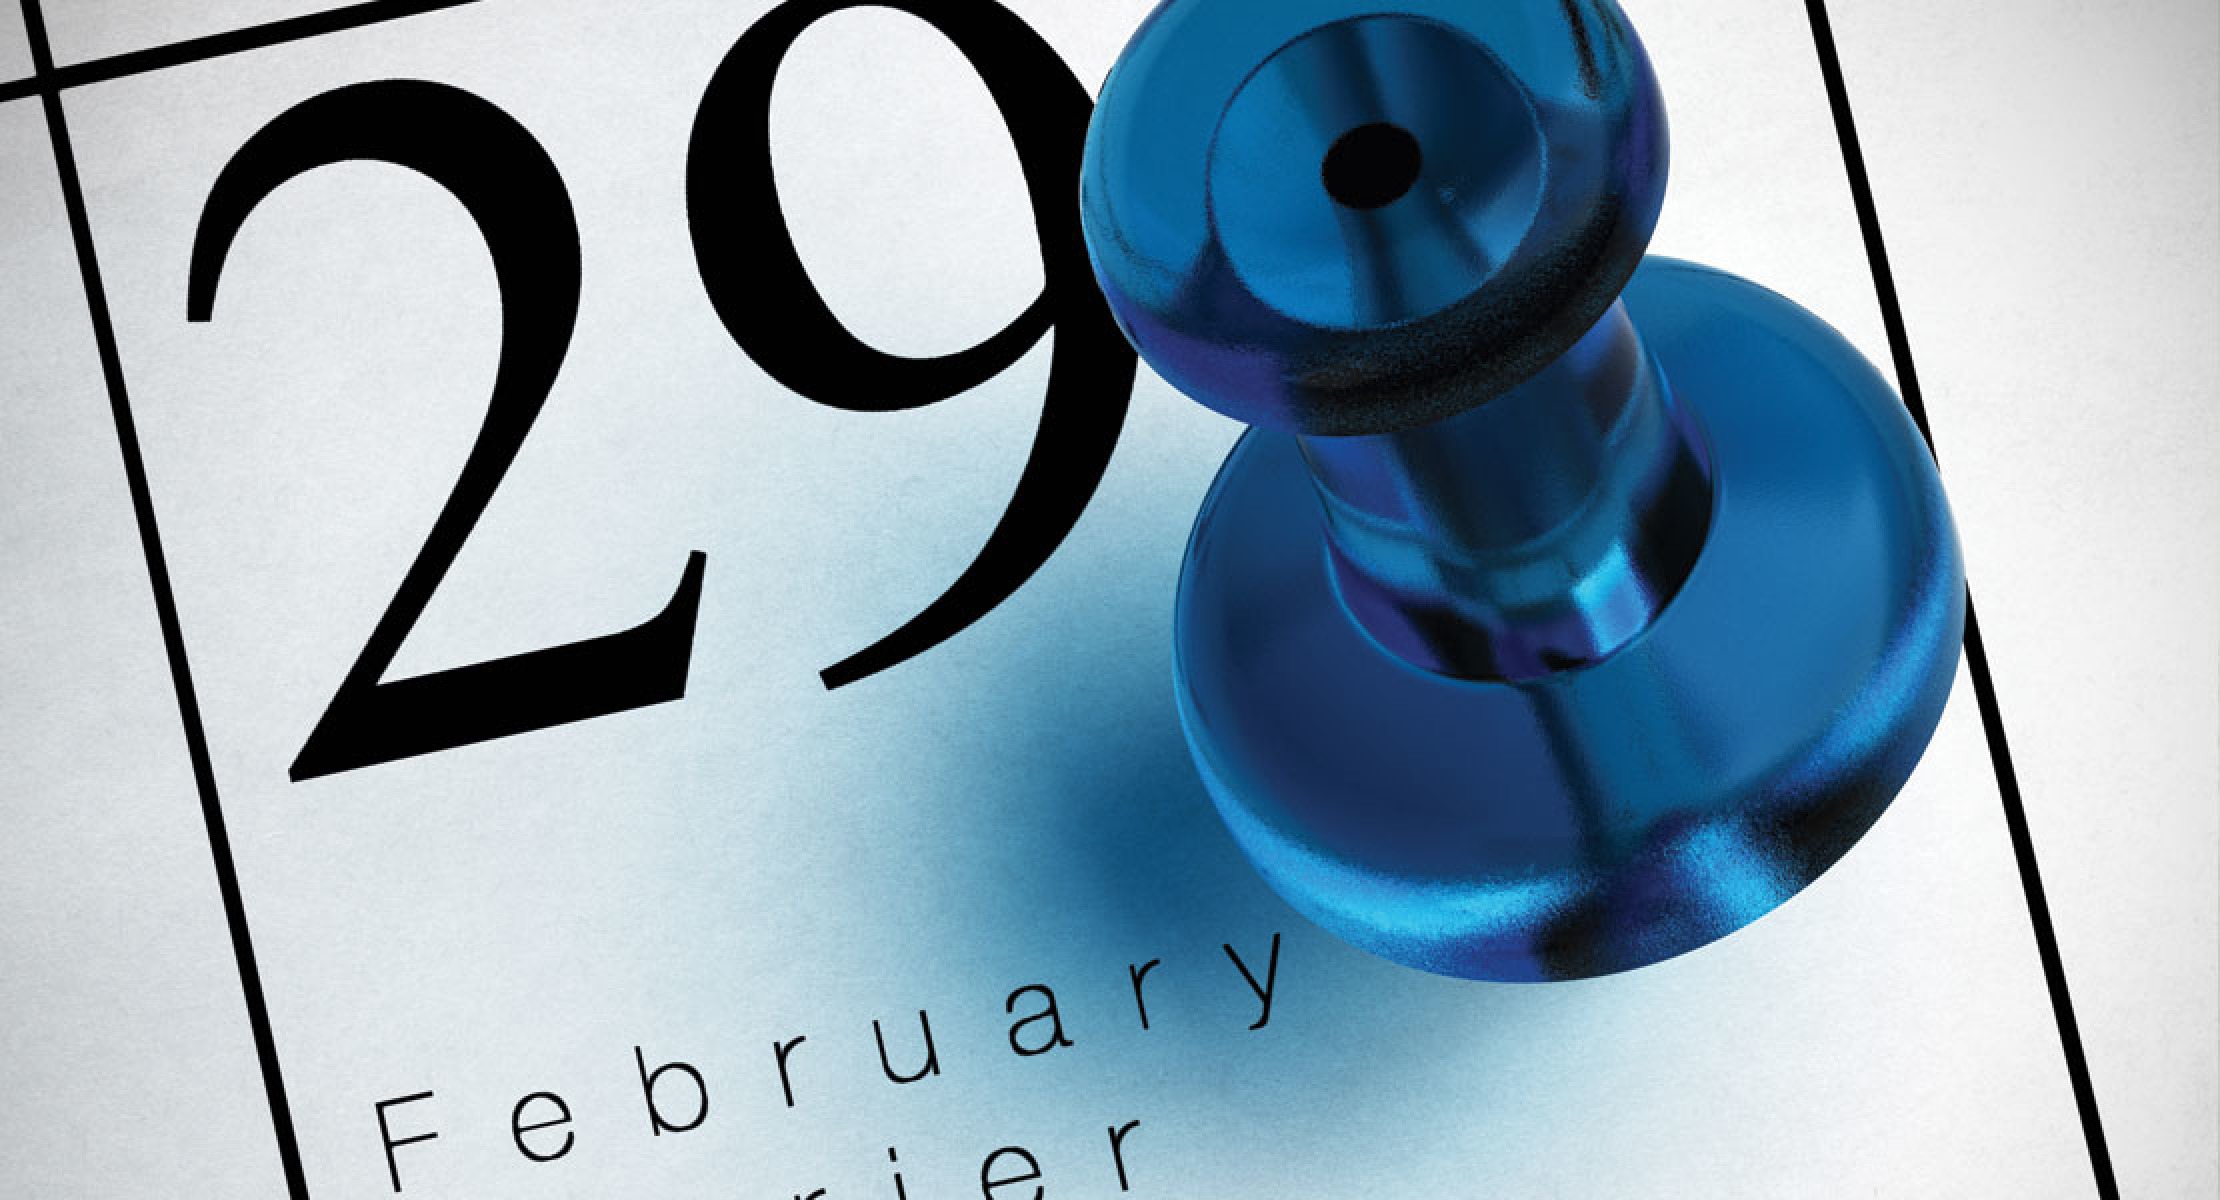 leap-year-puts-february-29-back-on-the-calendar-lehigh-valley